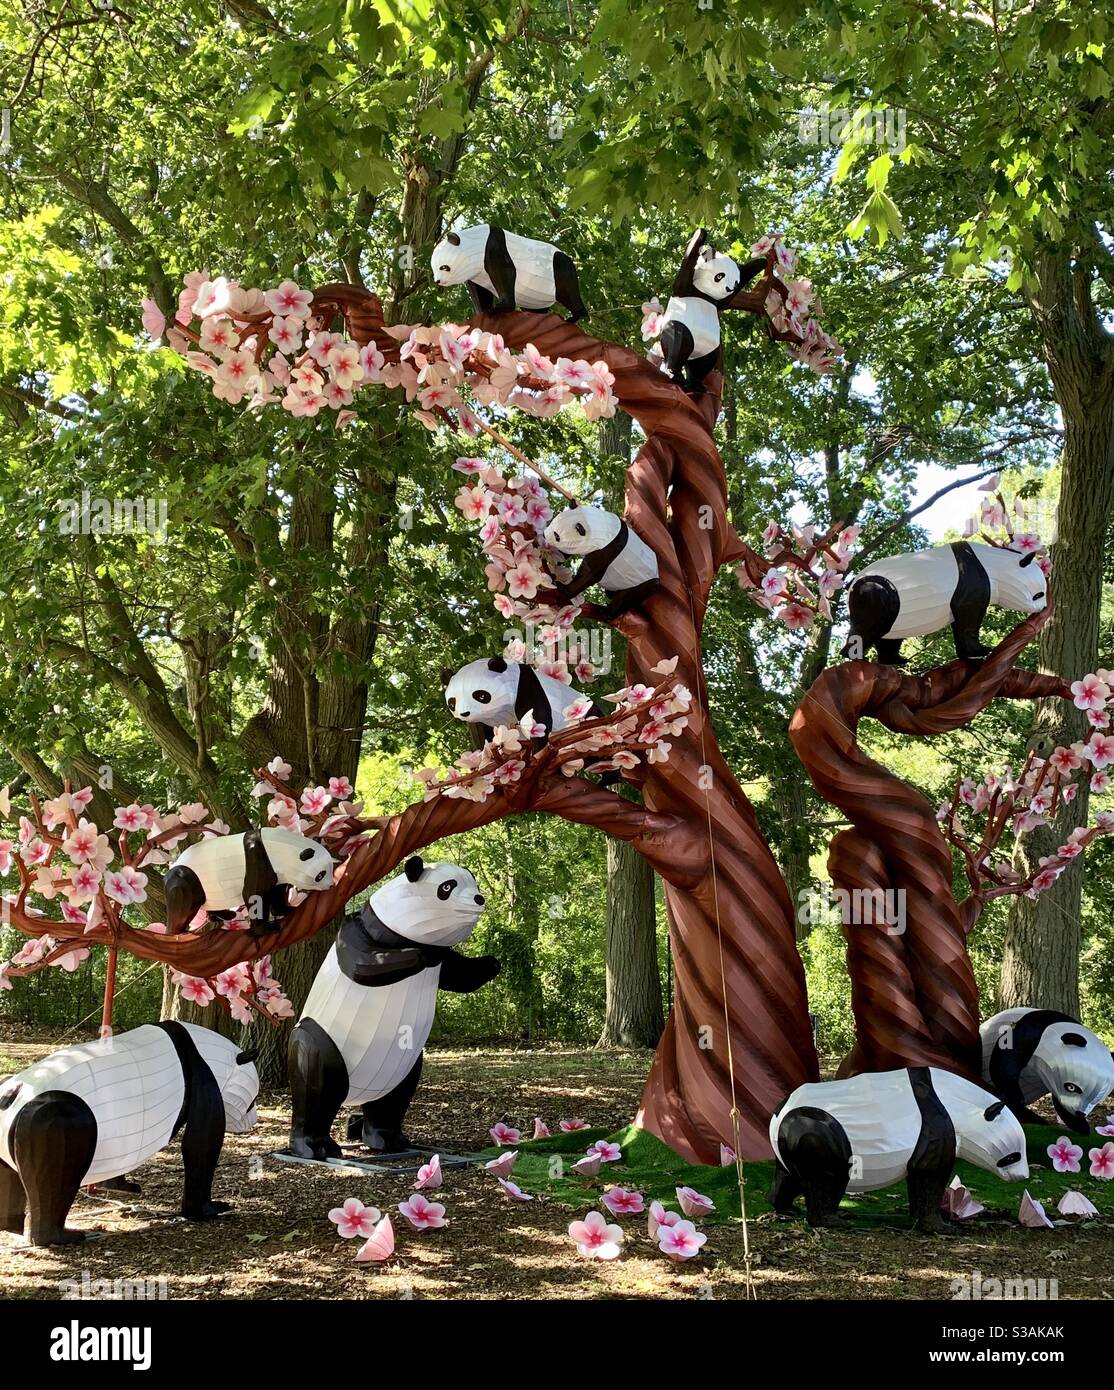 Huge inflatable, beautiful Panda display with cherry blossoms! Stock Photo